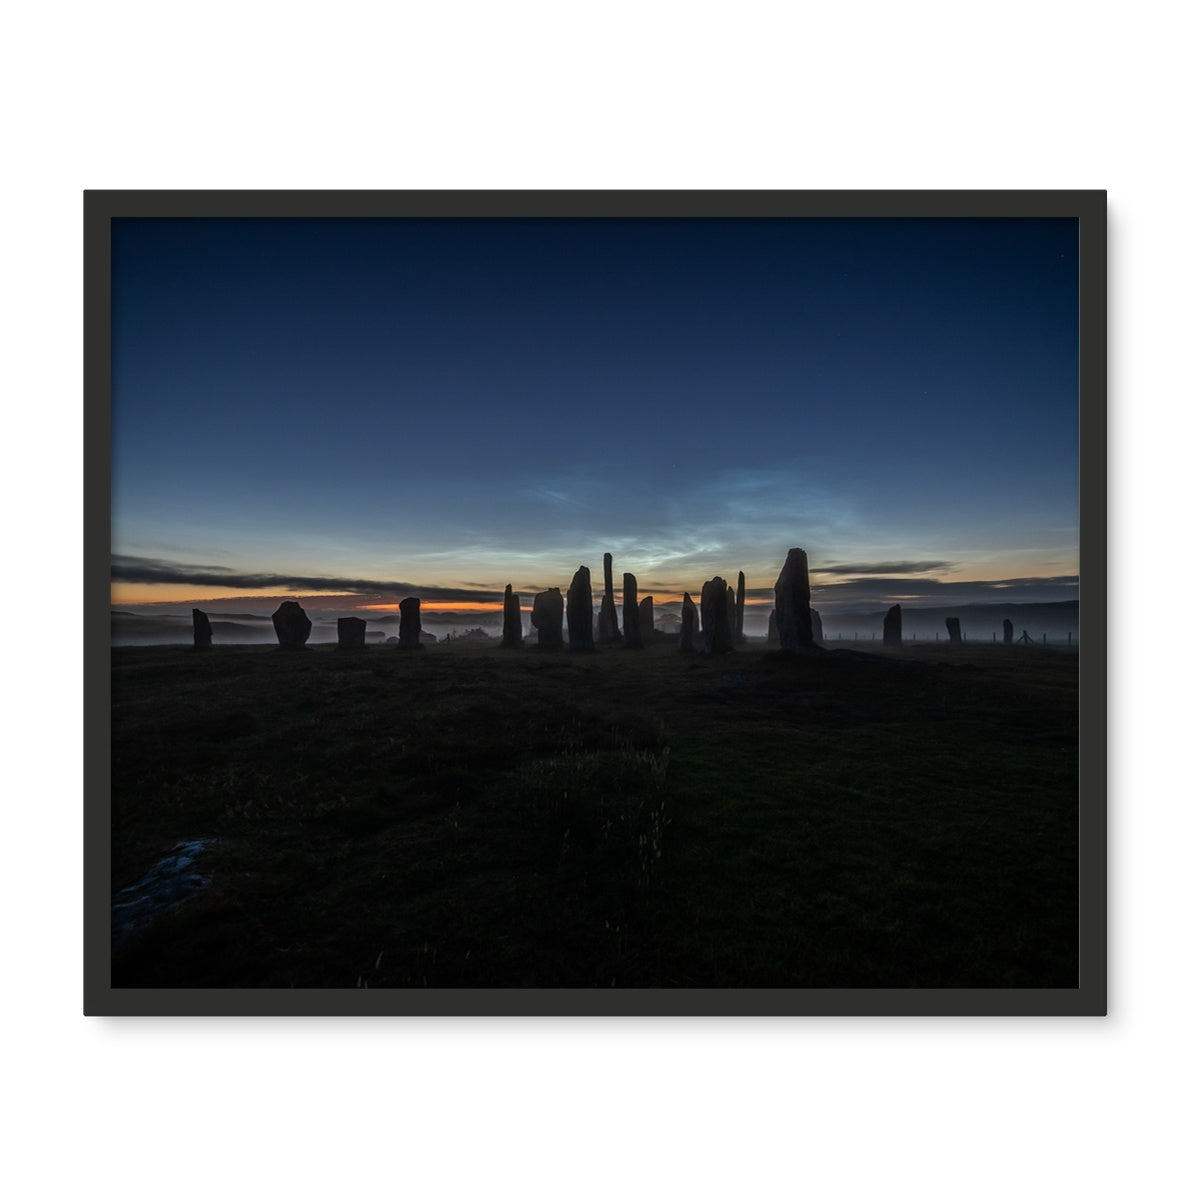 Callanish Stones and Noctilucent Clouds Framed Photo Tile